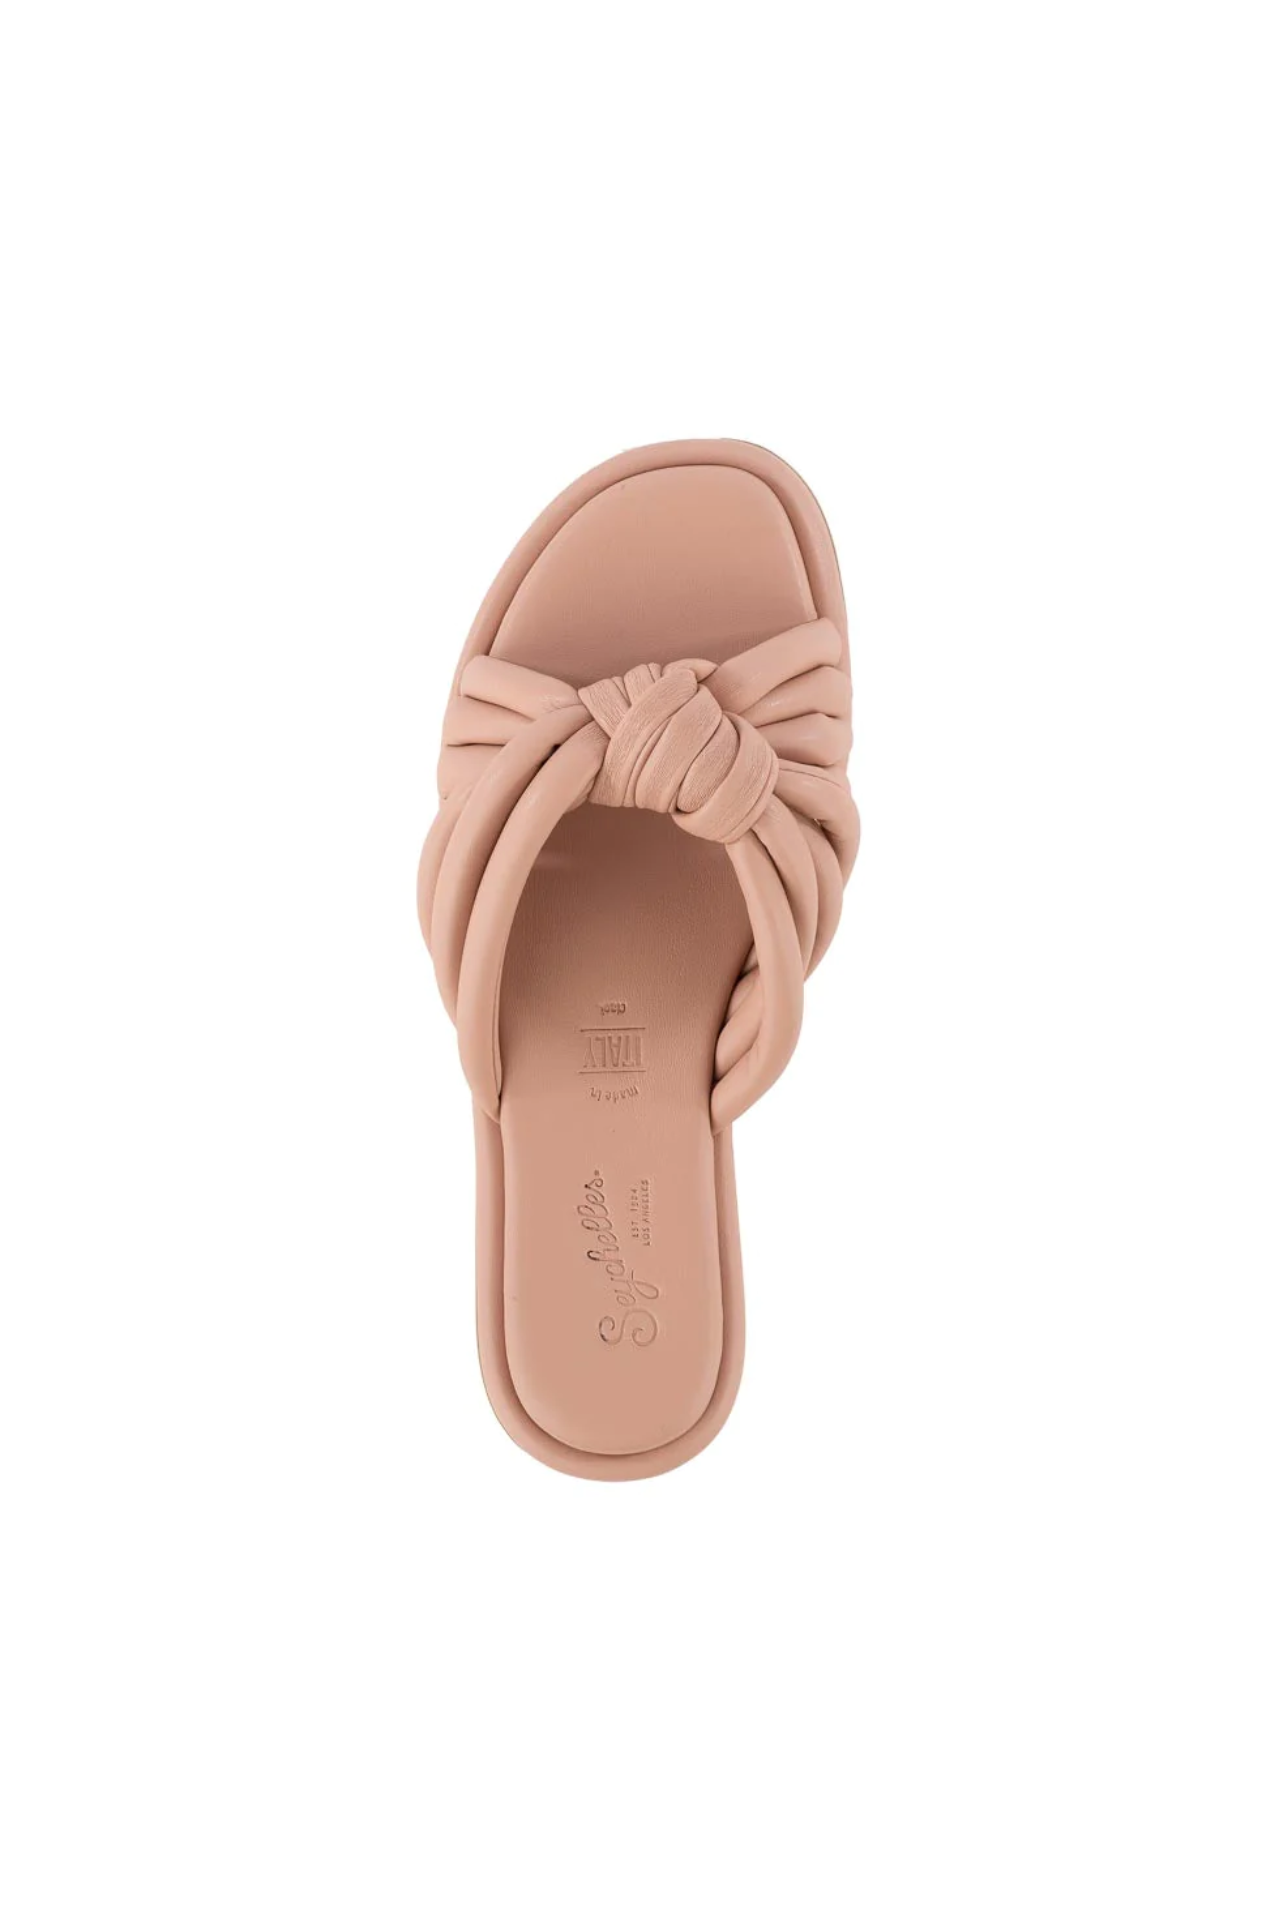 Simply the Best Sandal